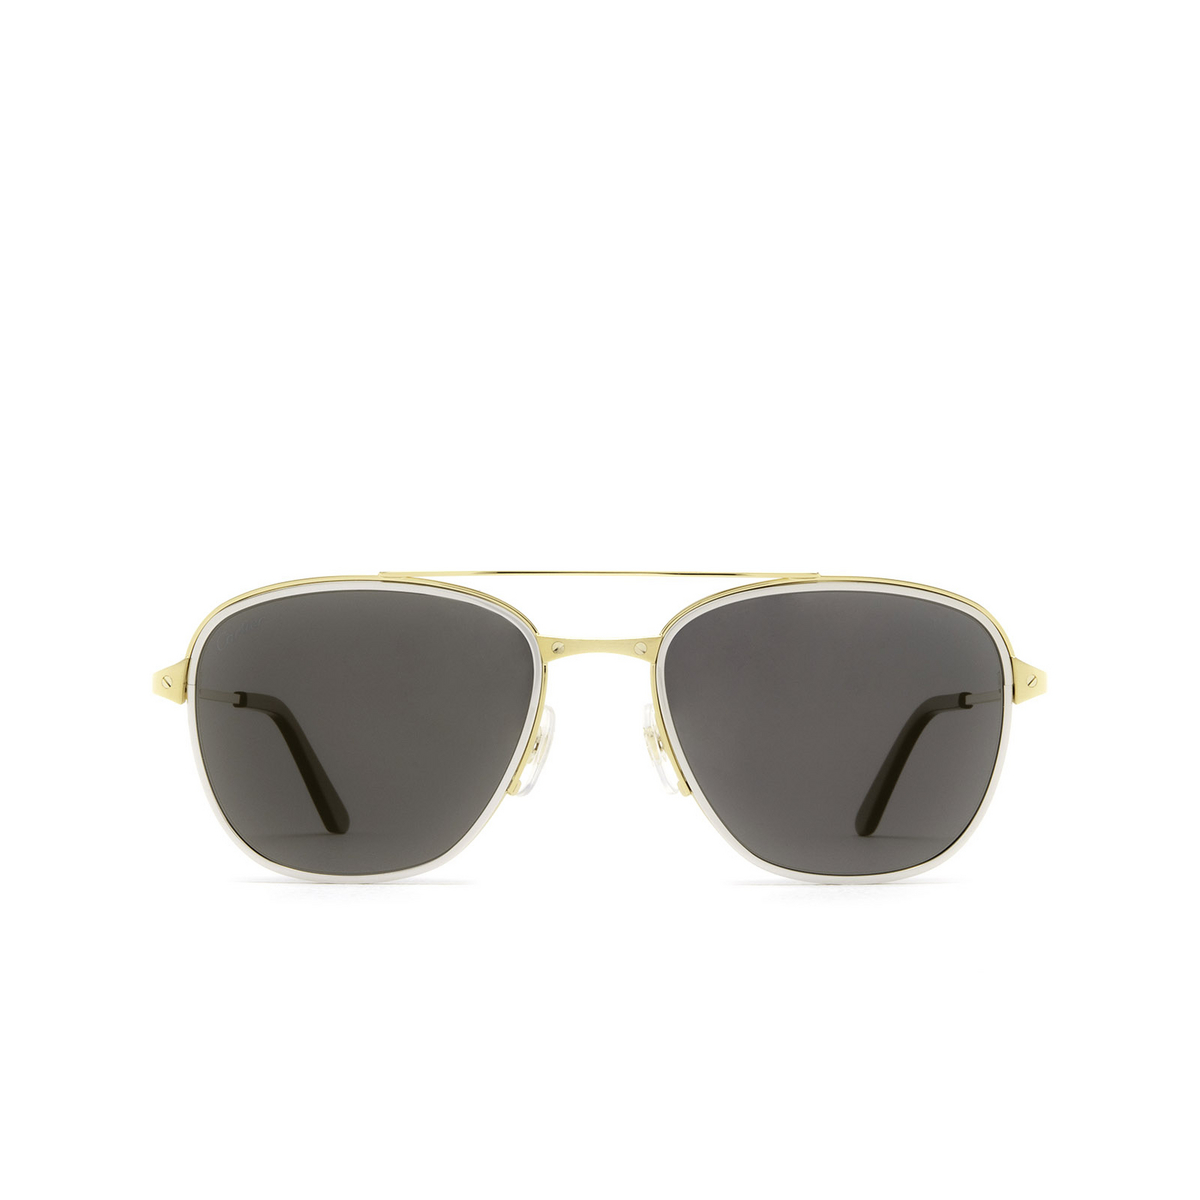 Cartier® Square Sunglasses: CT0326S color Gold 003 - front view.